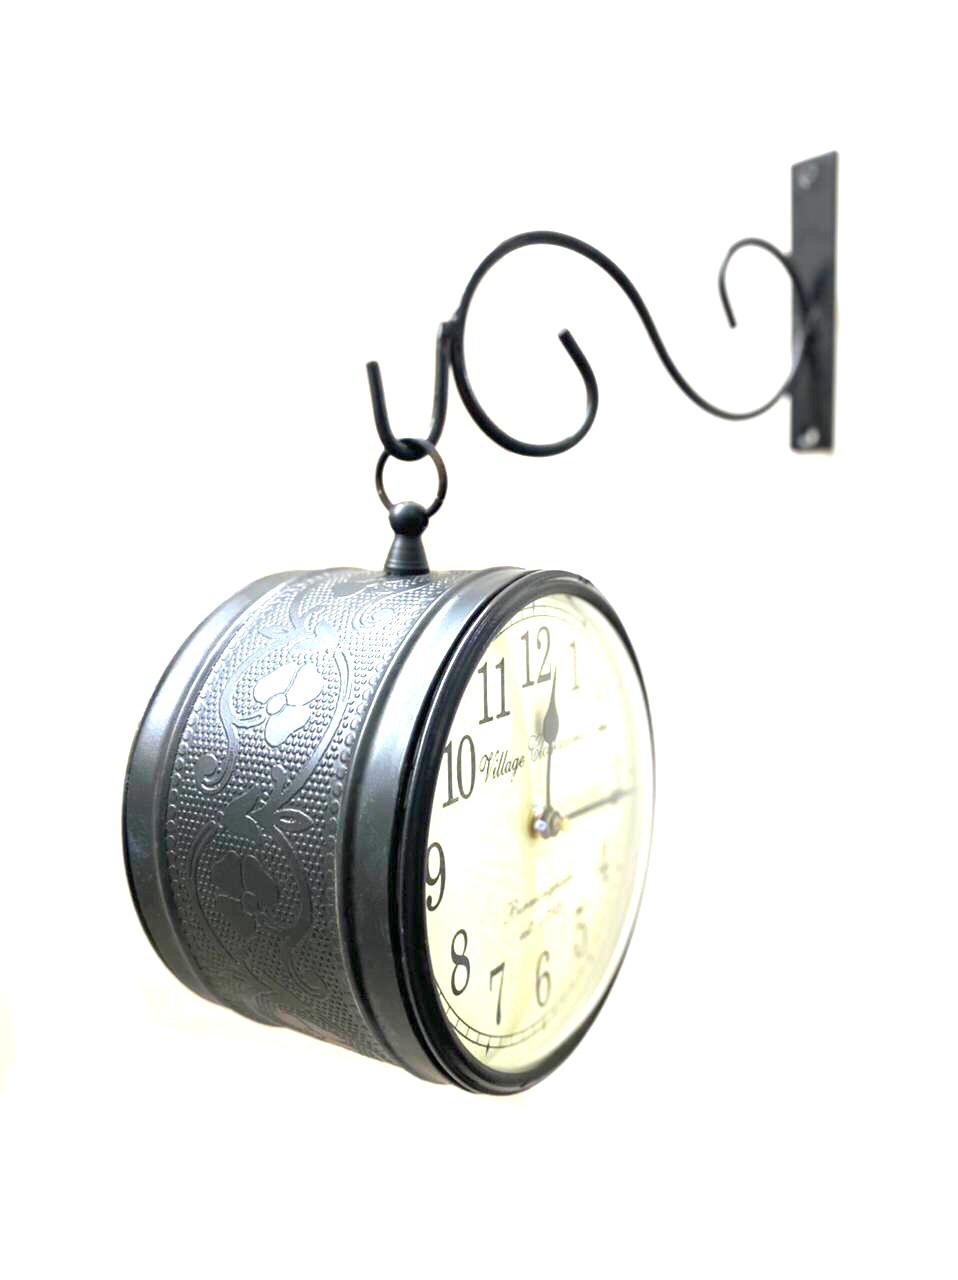 Double Side Clock Railway Vintage Style 6 Inches For Home Office By Tamrapatra